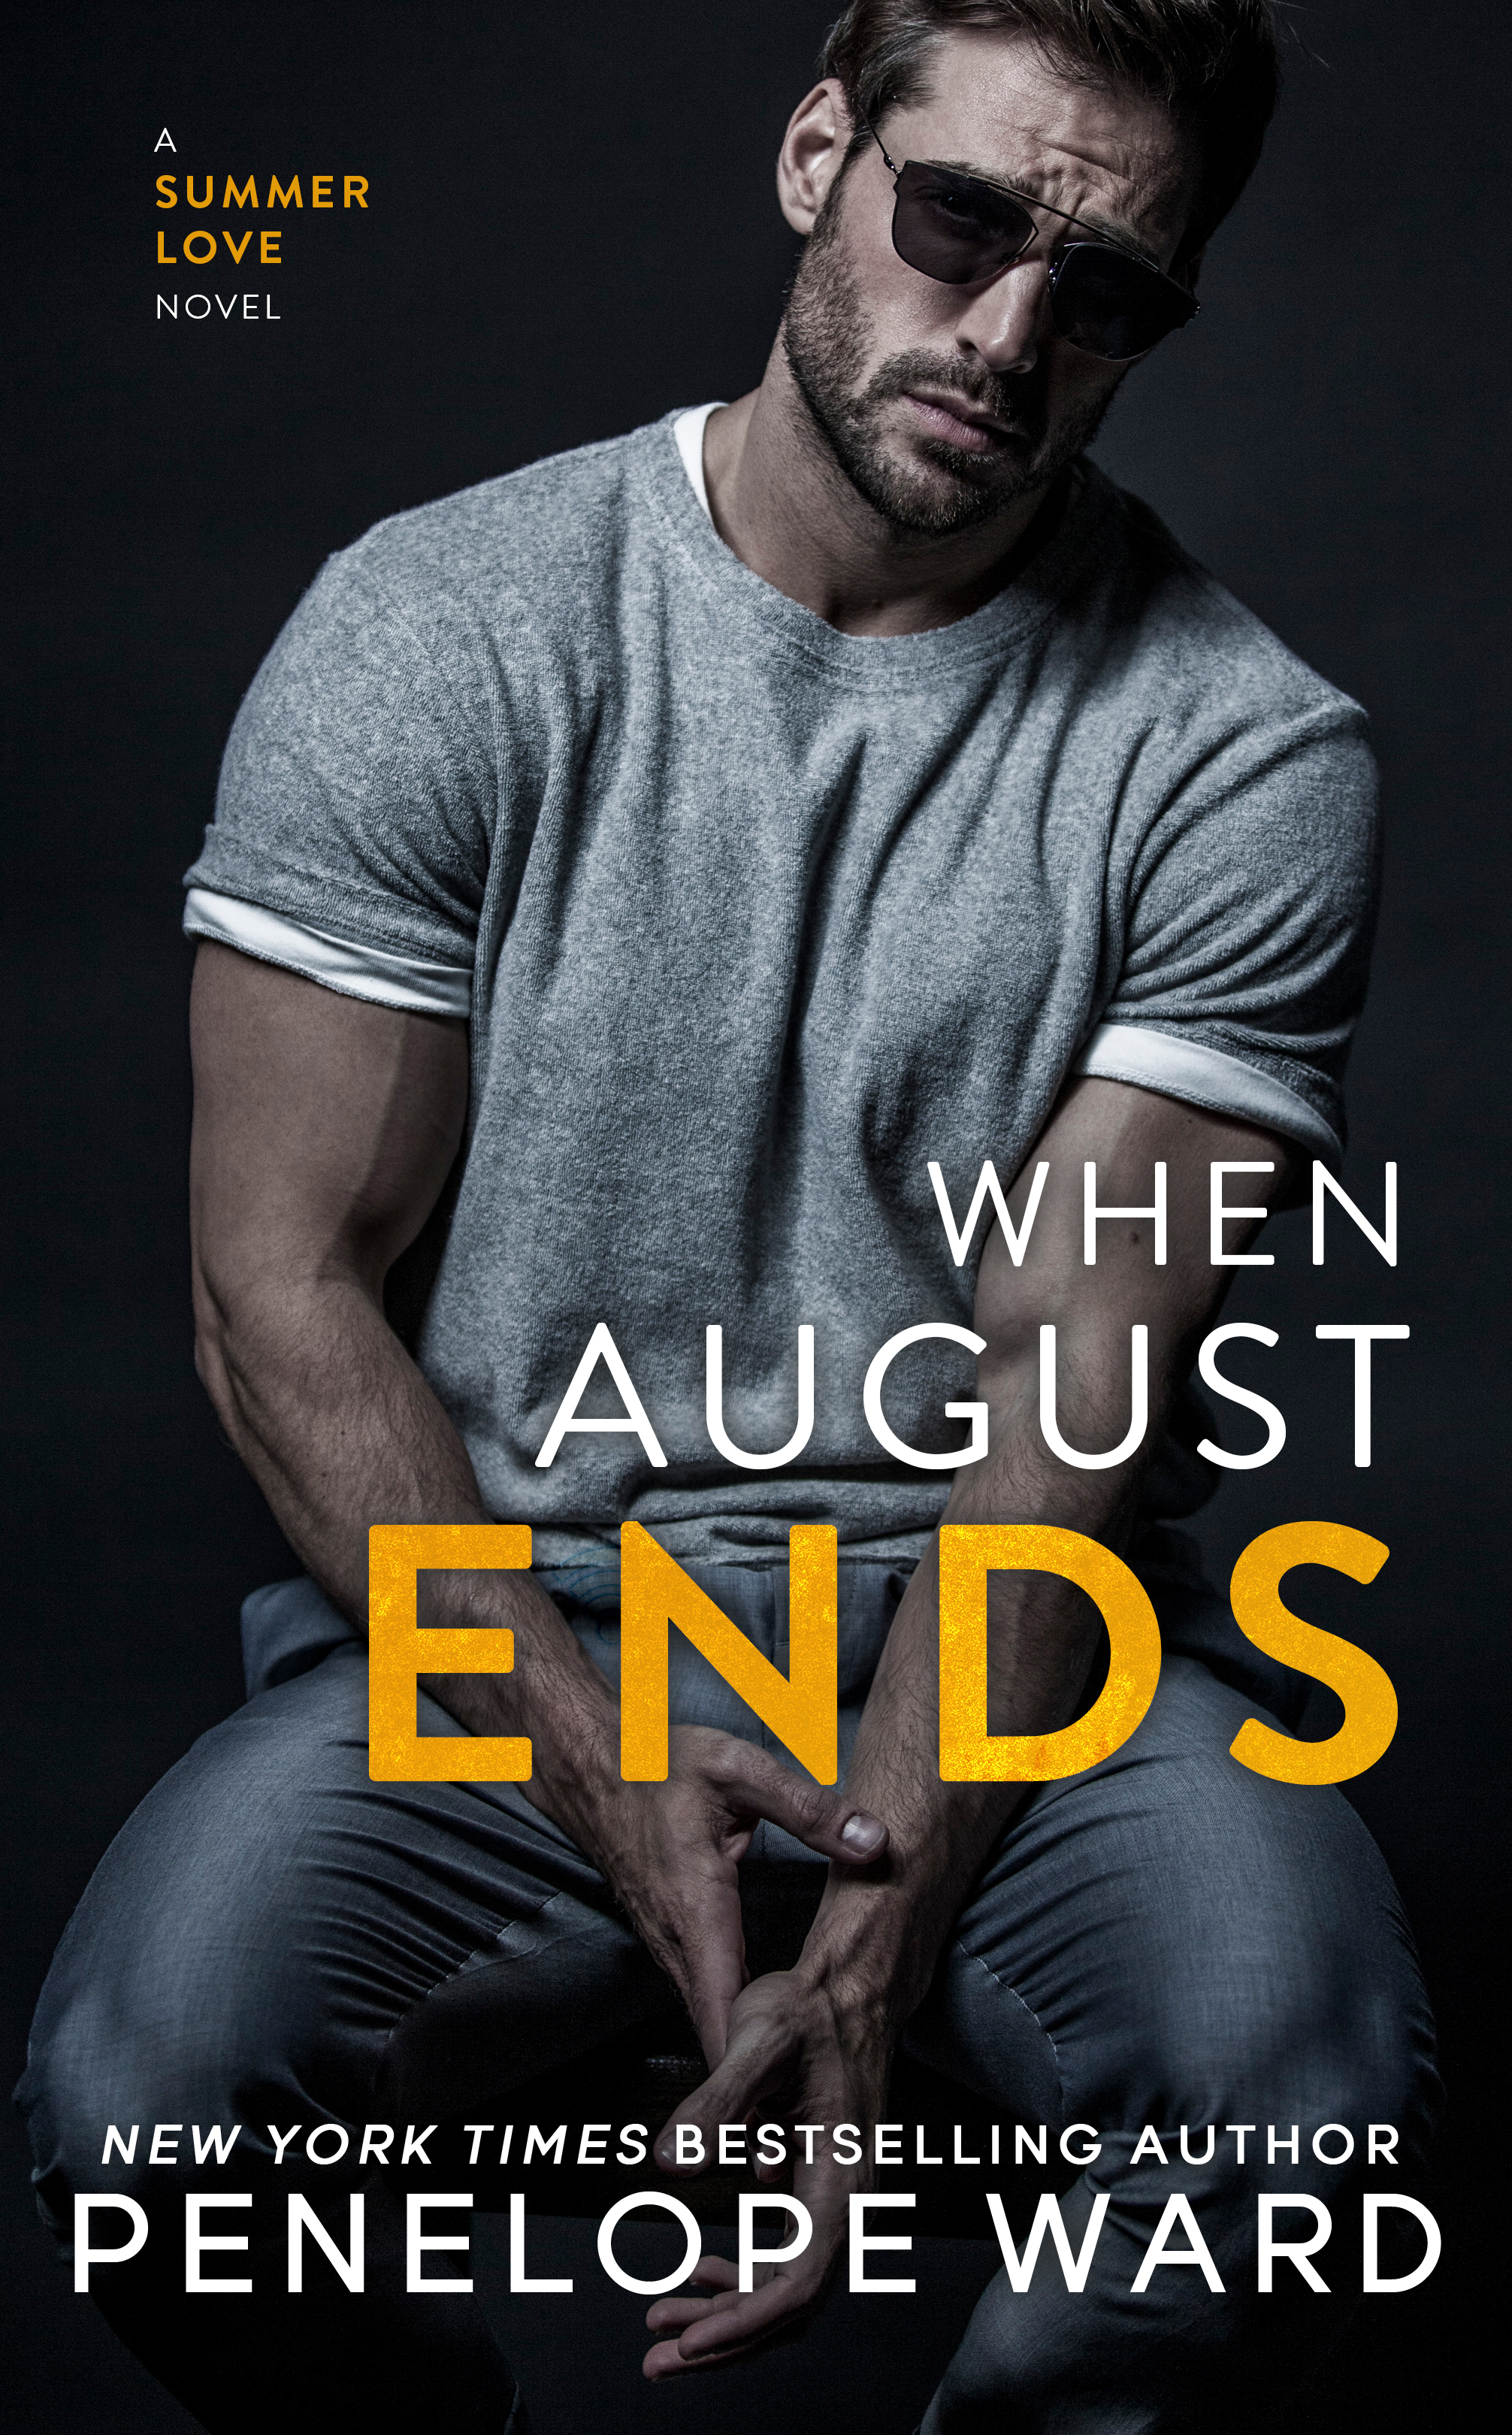 When August Ends by Penelope Ward [Excerpt Reveal/Teaser]